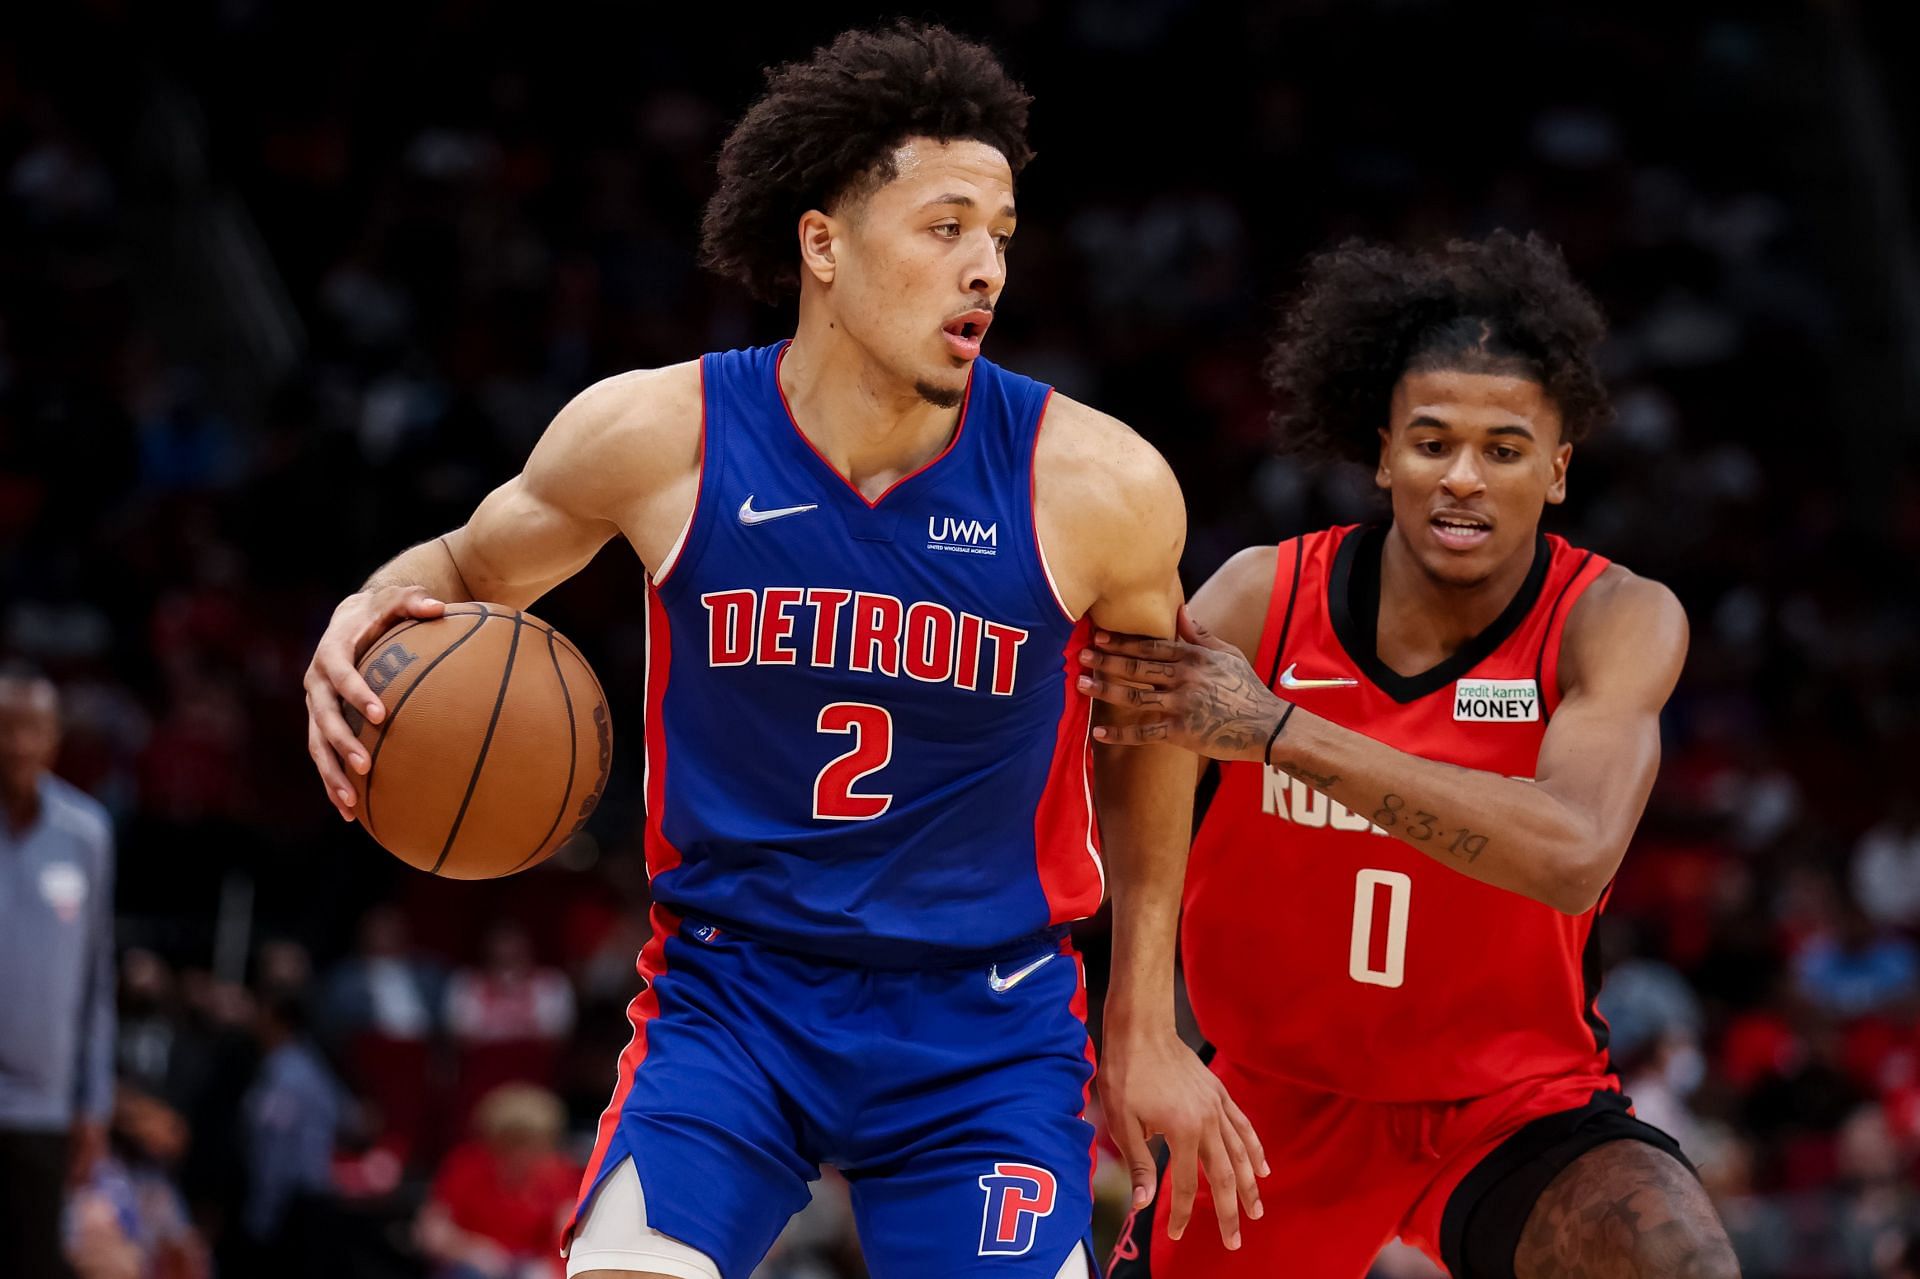 Cade Cunningham of the Detroit Pistons and Jalen Green of the Houston Rockets are the top two picks of the 2021 NBA Draft.